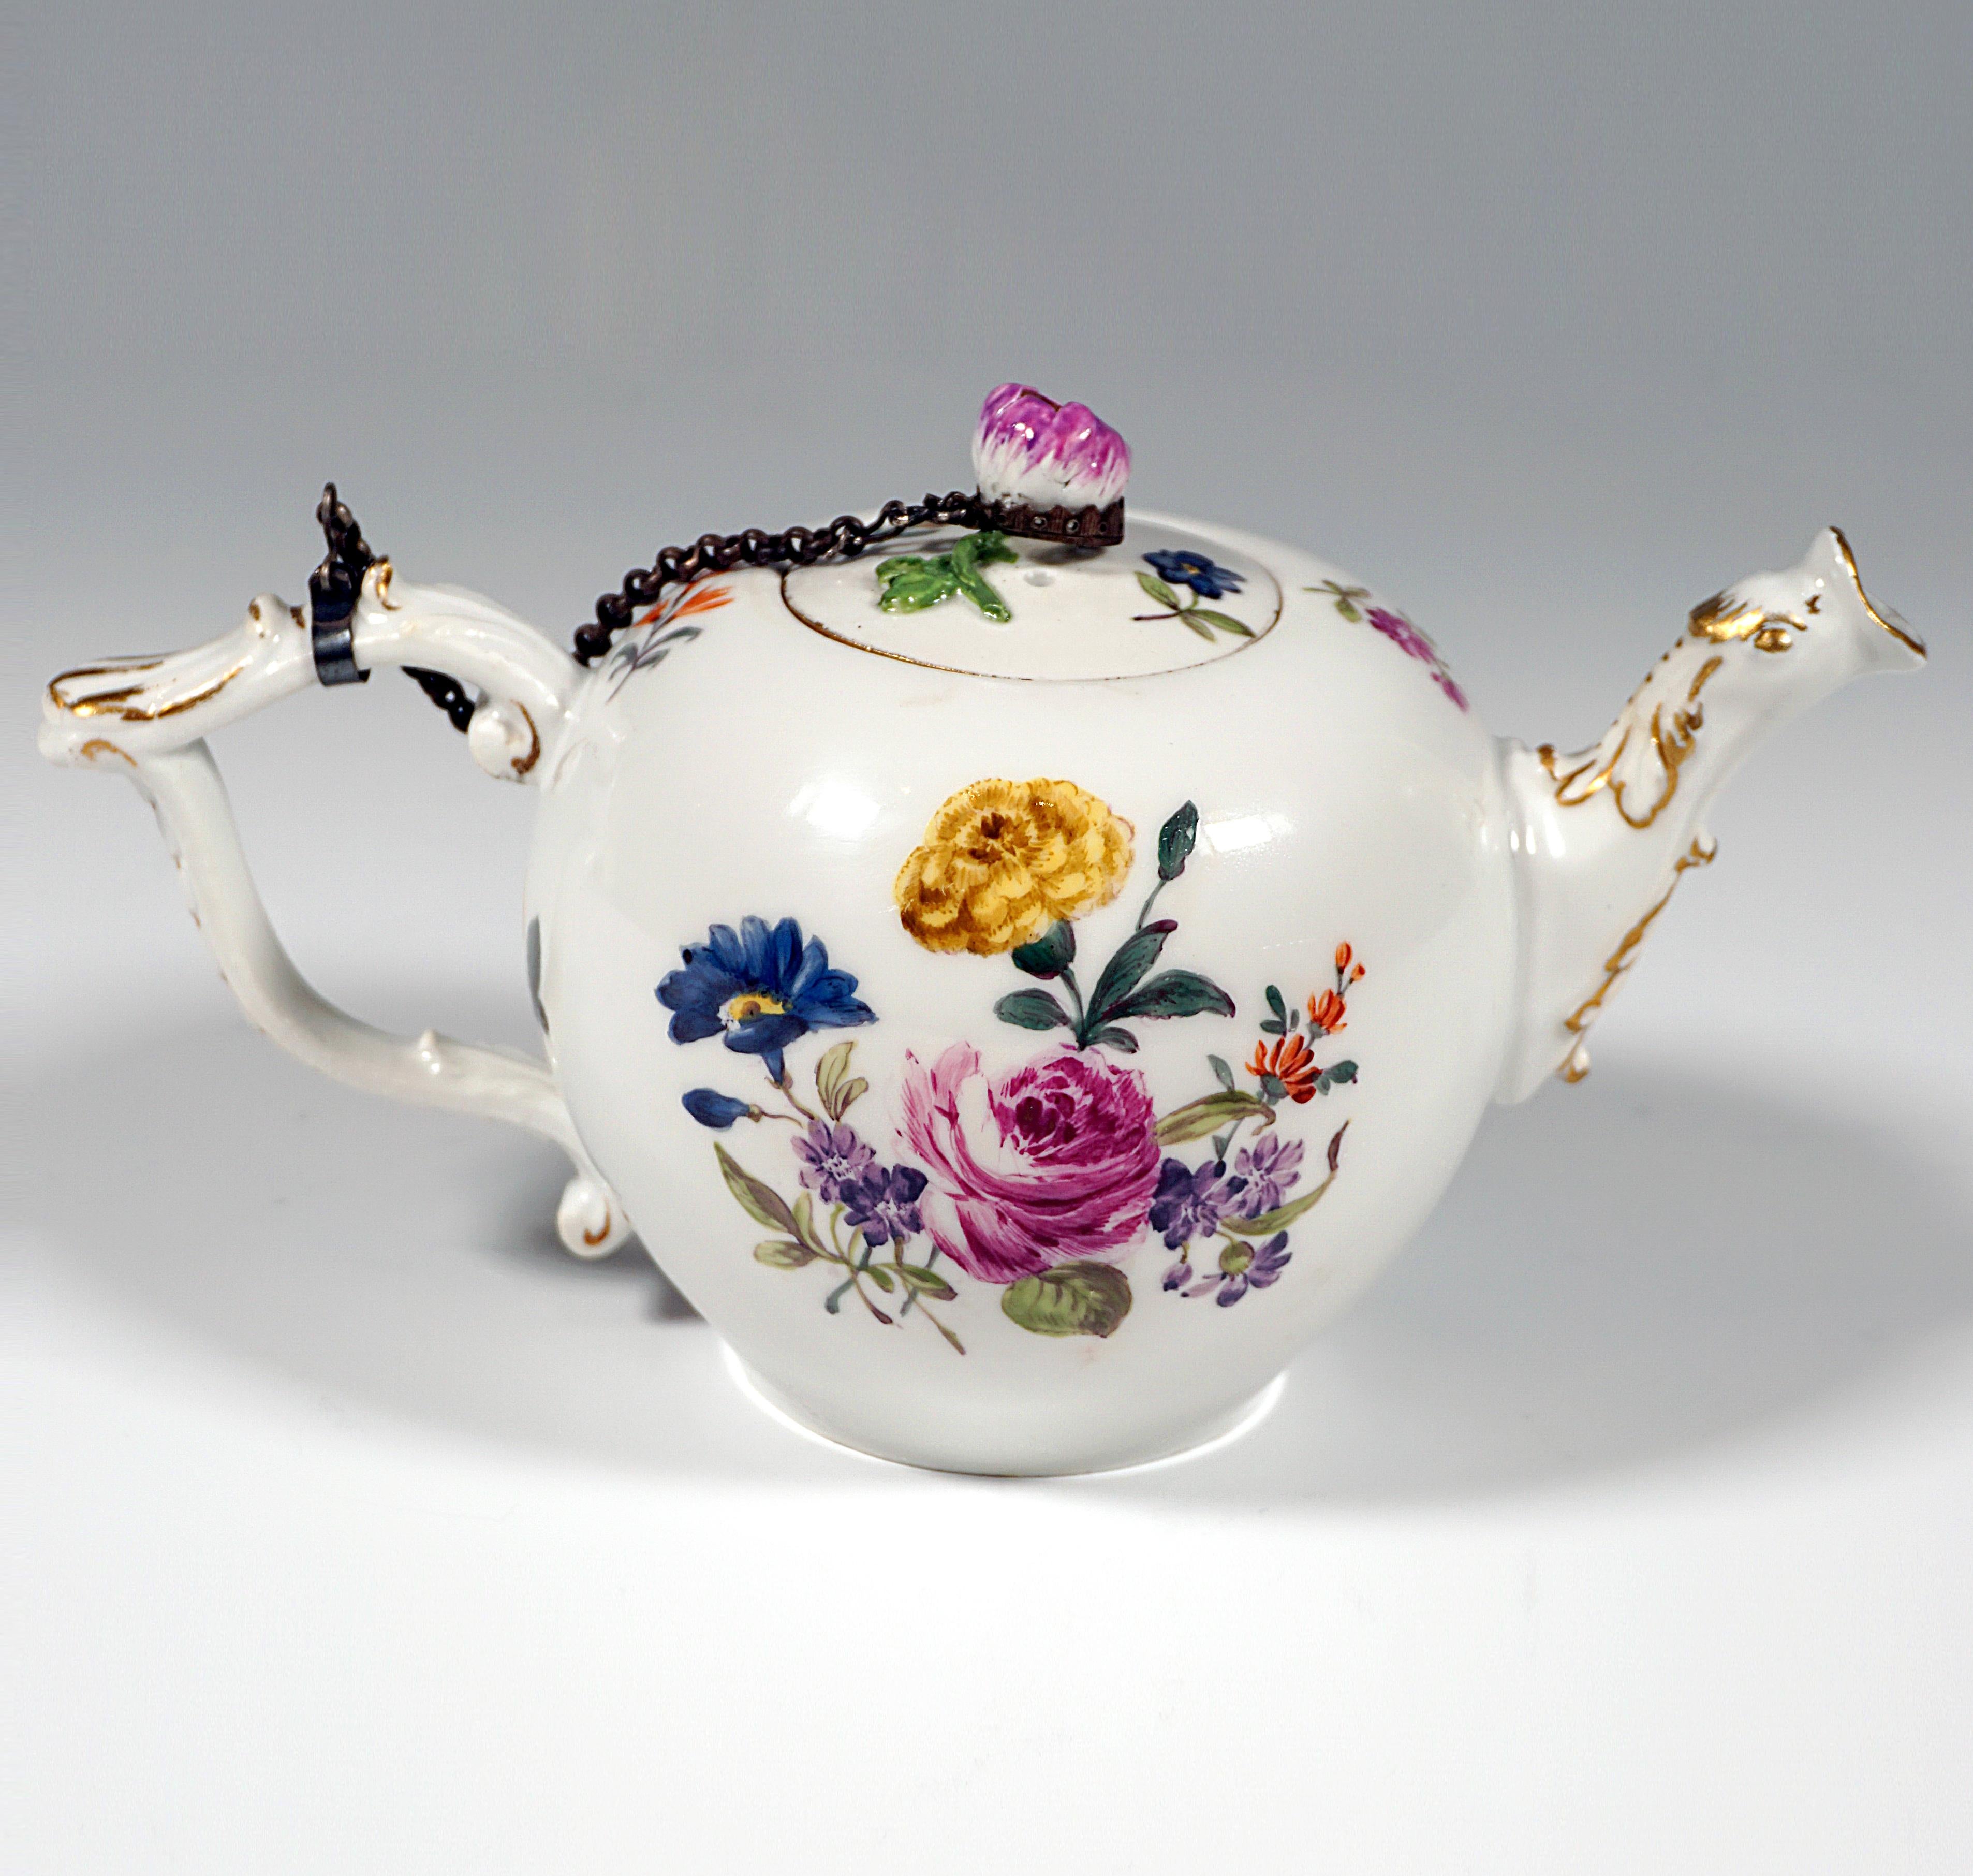 Very Early And Rare Piece From The Meissen/Germany Manufactory:
Teapot, made circa 1750, the belly of the pot painted on the front and back with large floral arrangements, scattered floral painting in between and on the lid, sculpted flower bud as